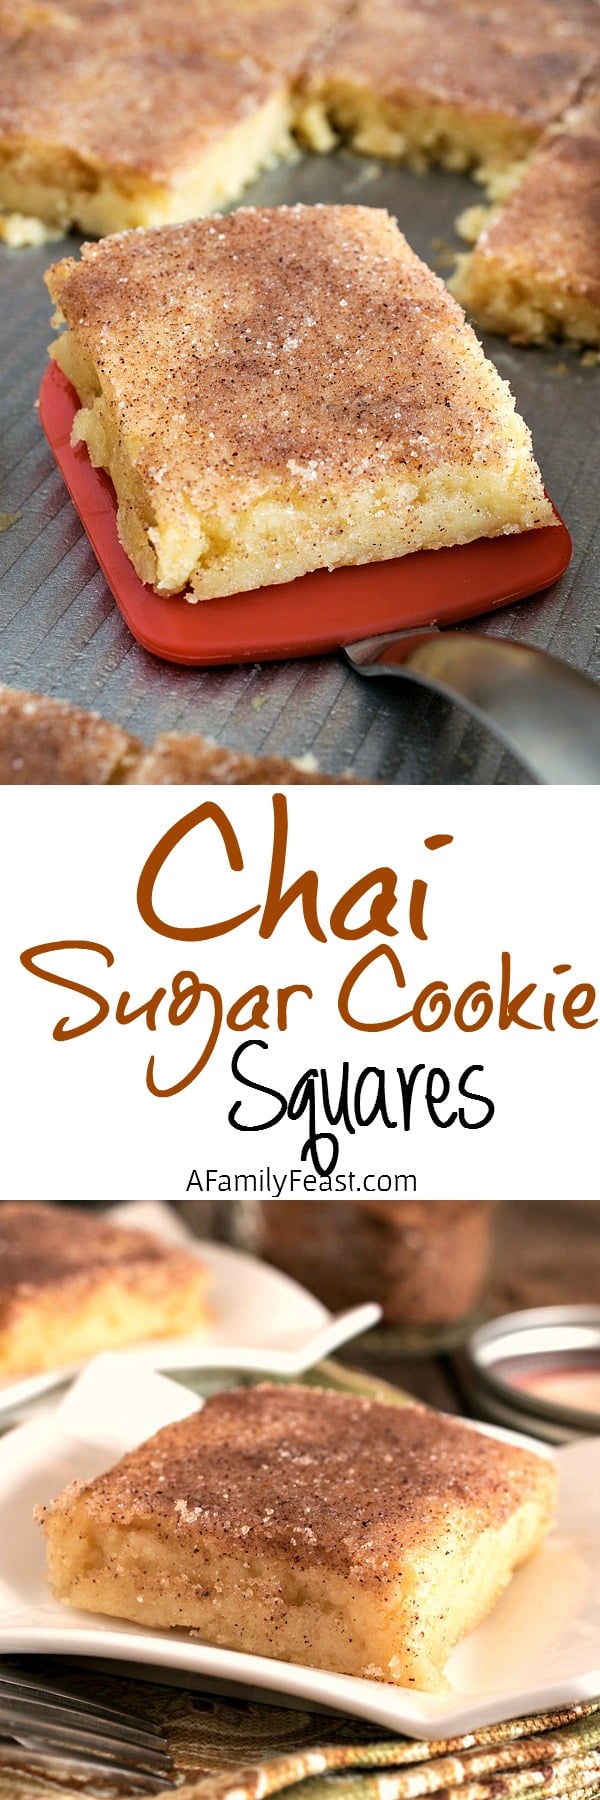 Chai Sugar Cookie Squares - Adapted from a Momofuko Milk Bar recipe, these Chai Sugar Cookie Squares are easy to make and delicious!